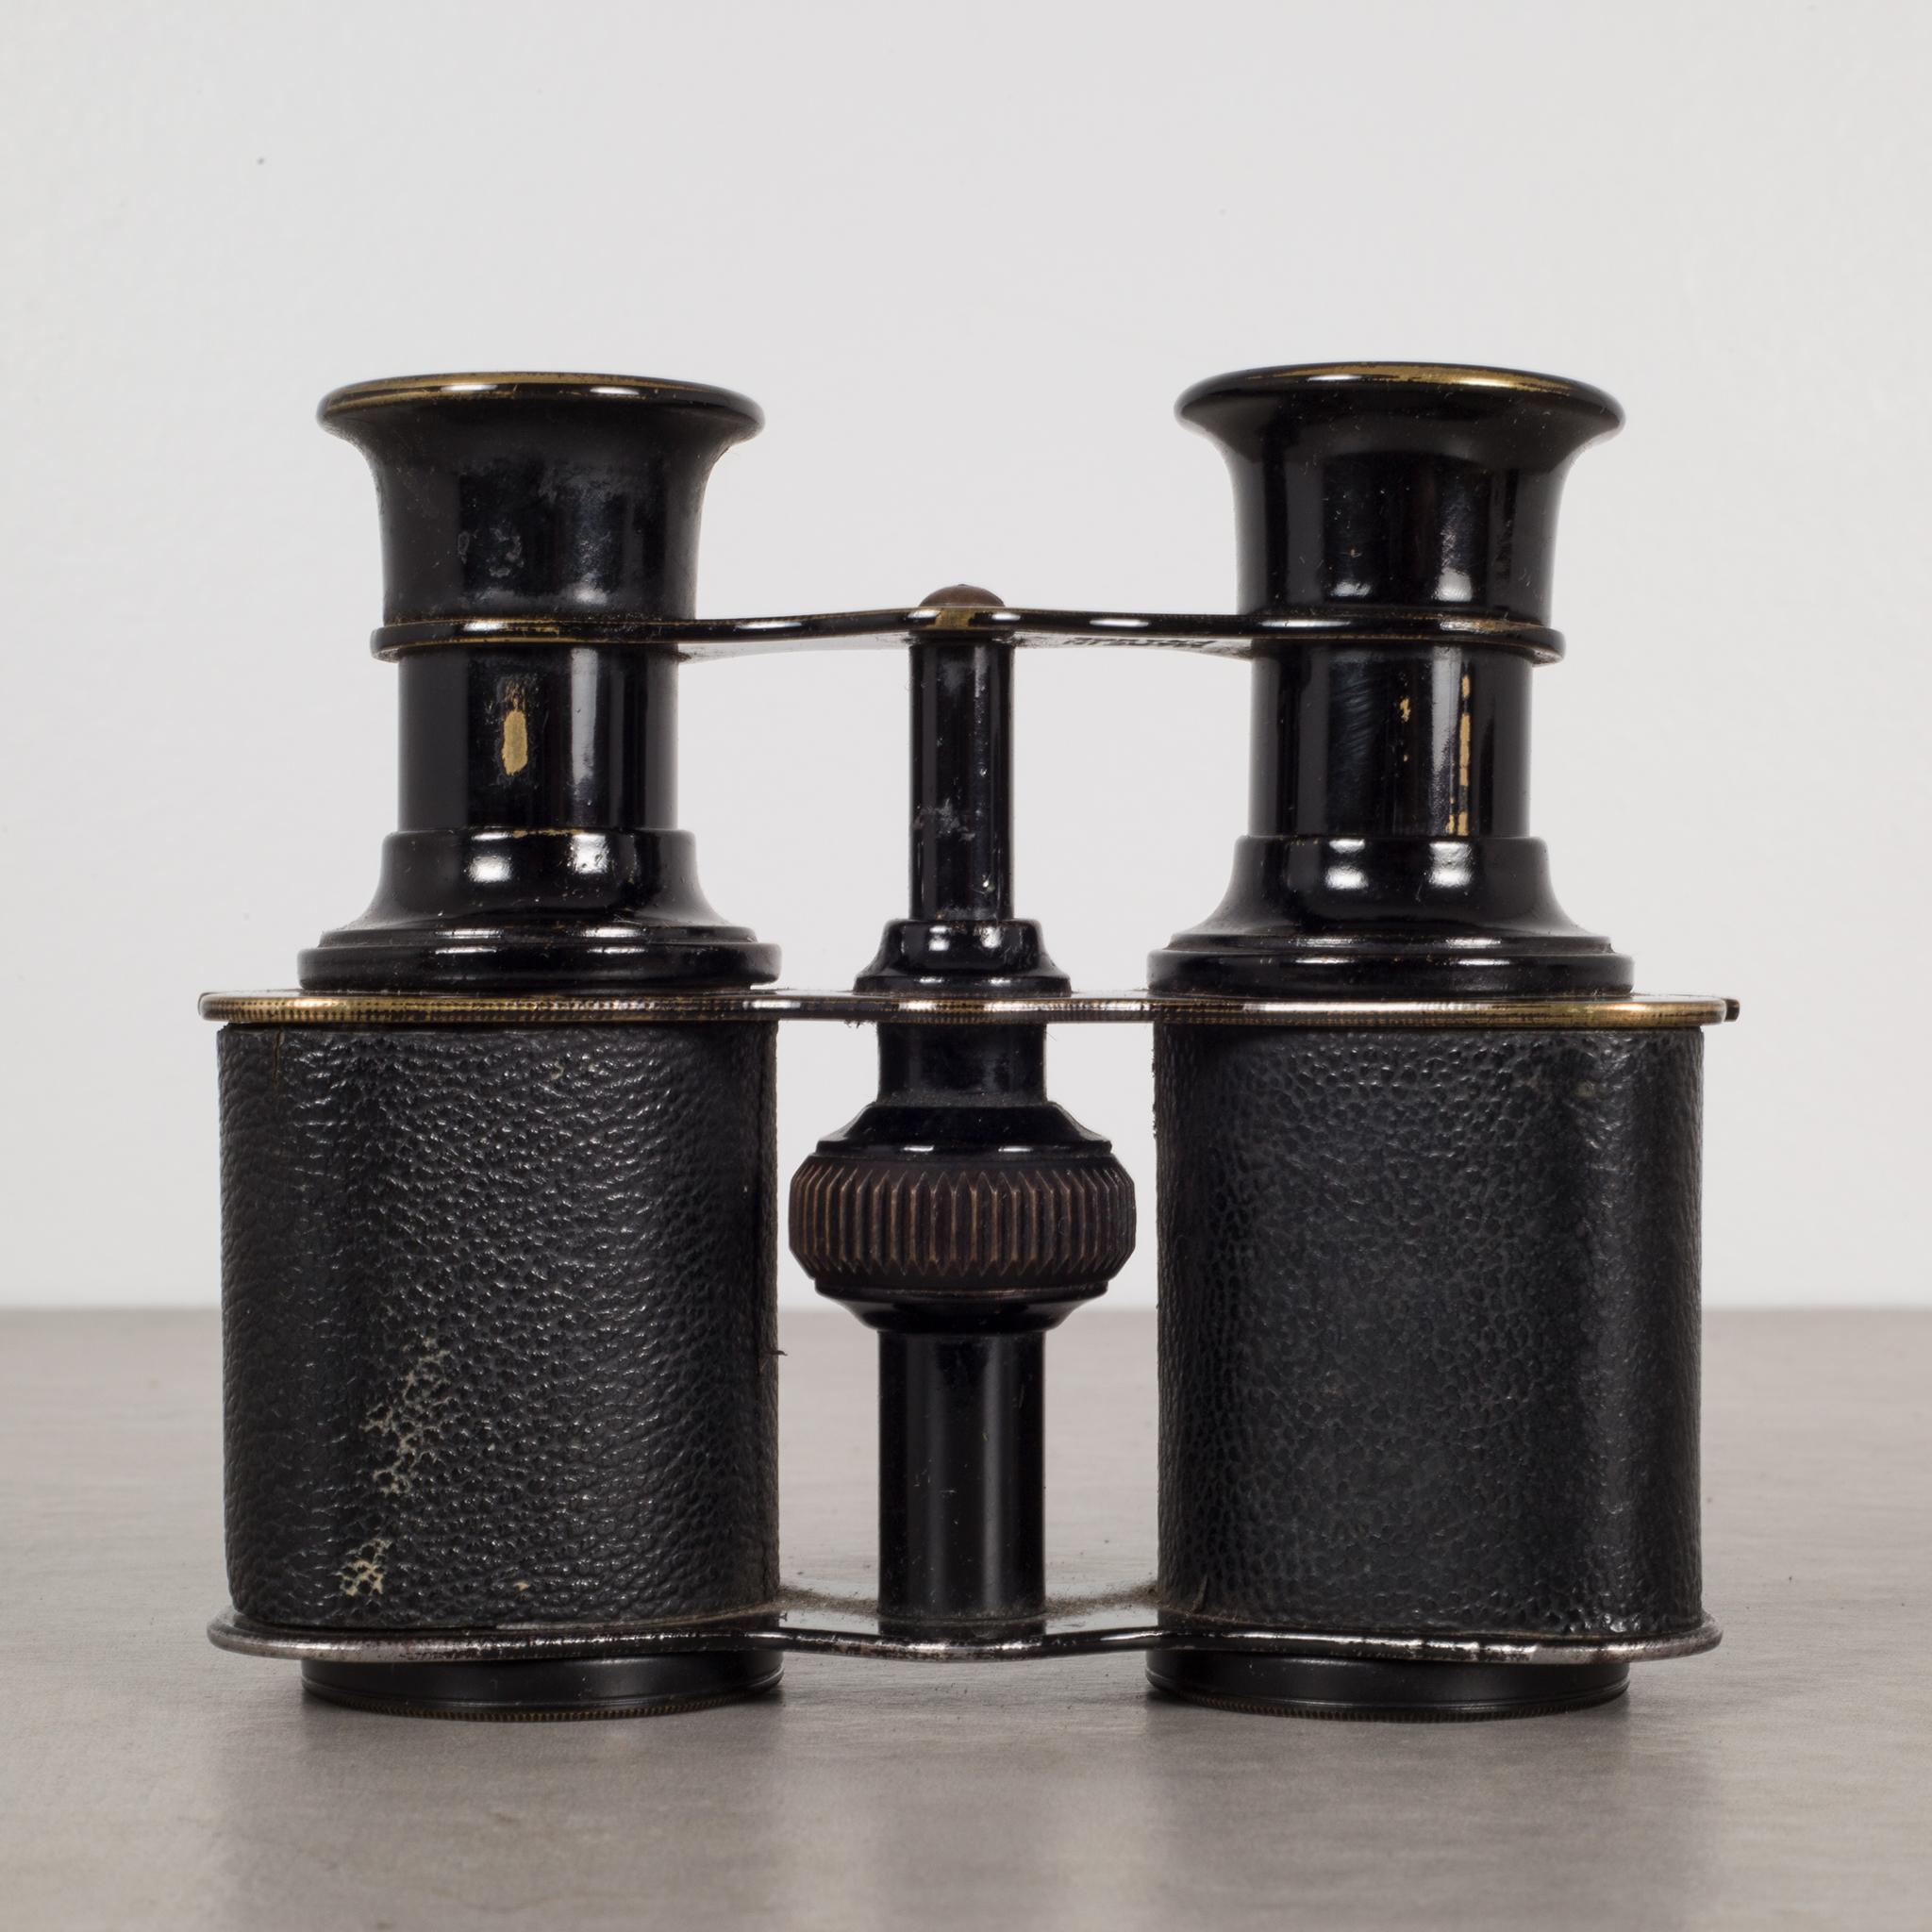 About

This is an original pair of Sportier Paris binoculars. This pair of binoculars has a leather wrapped body with enameled brass barrels. 